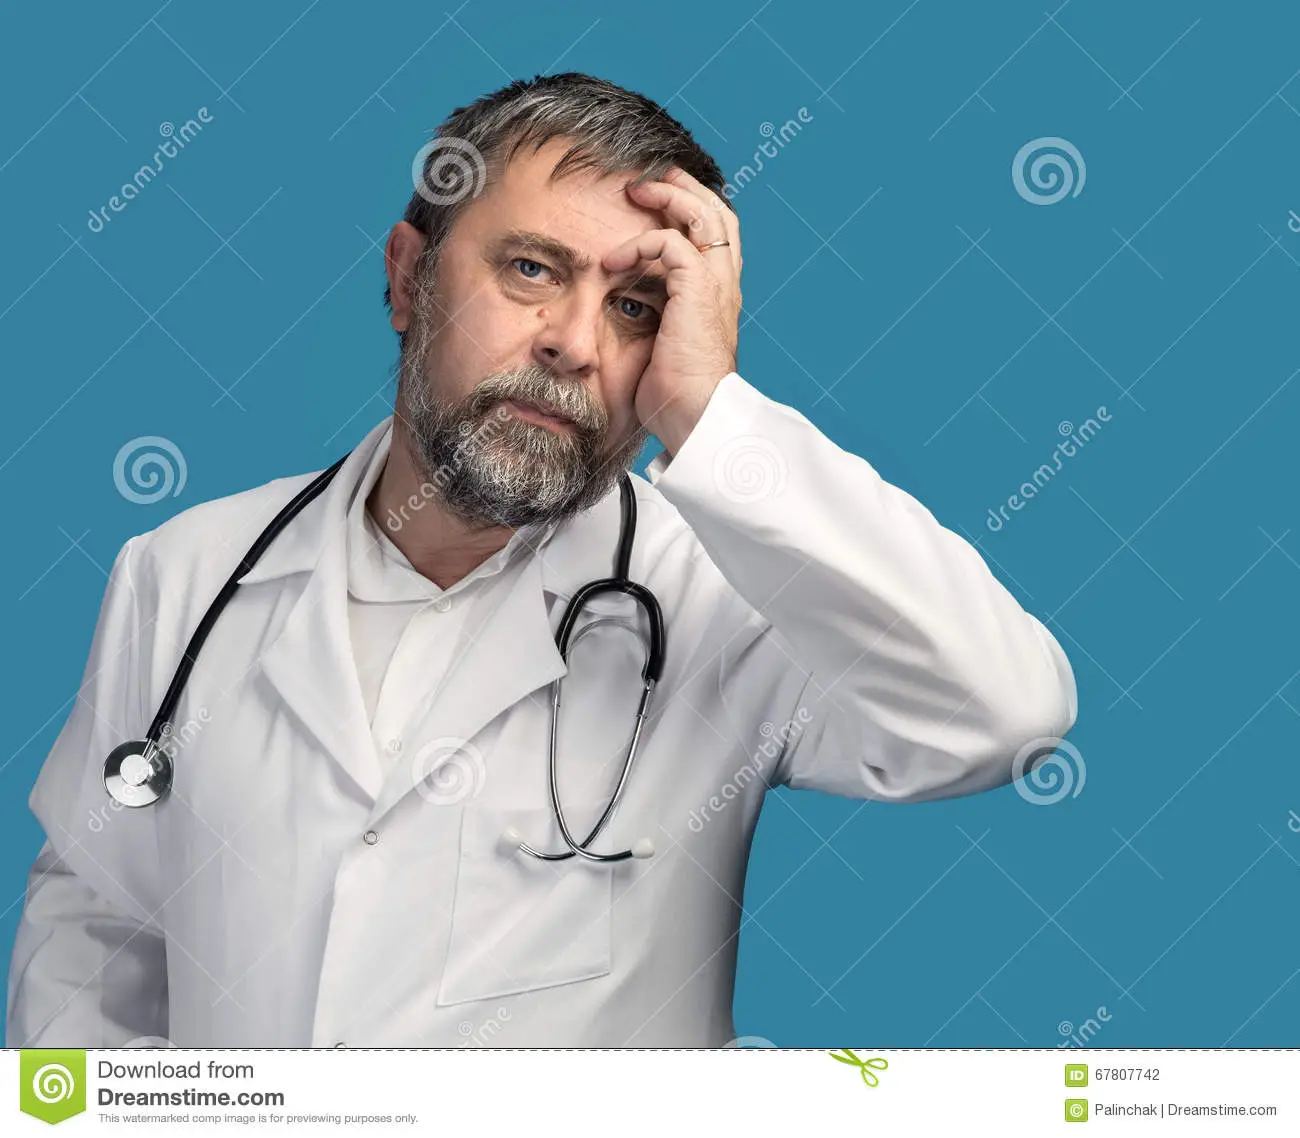 Portrait of a tired doctor stock photo. Image of mature